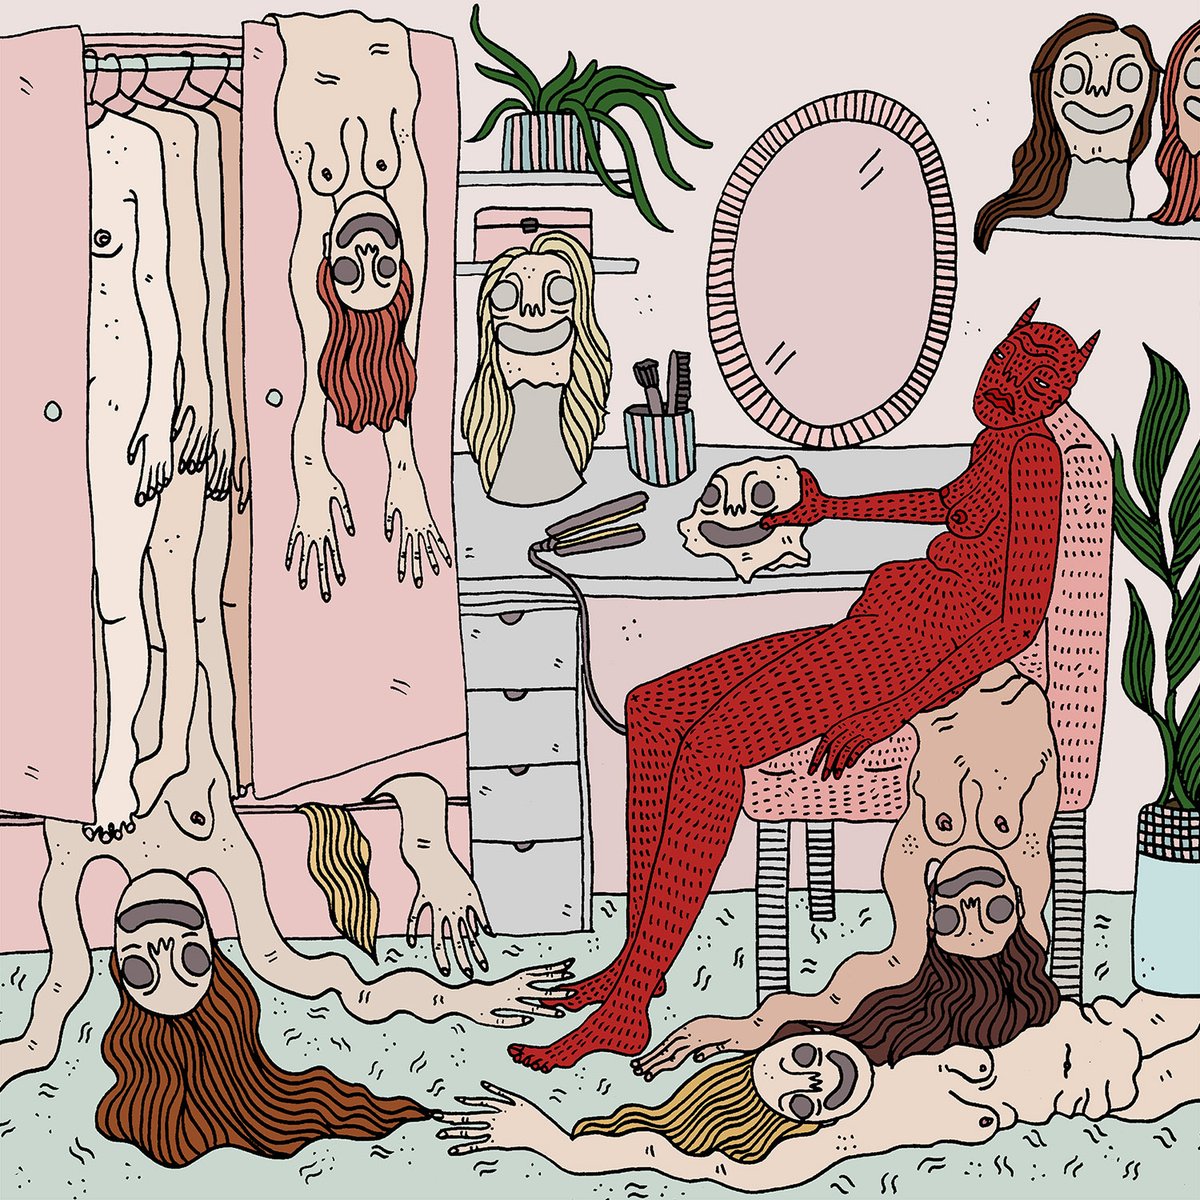 Magical Drawings Put Women in Conversation With Their Demons